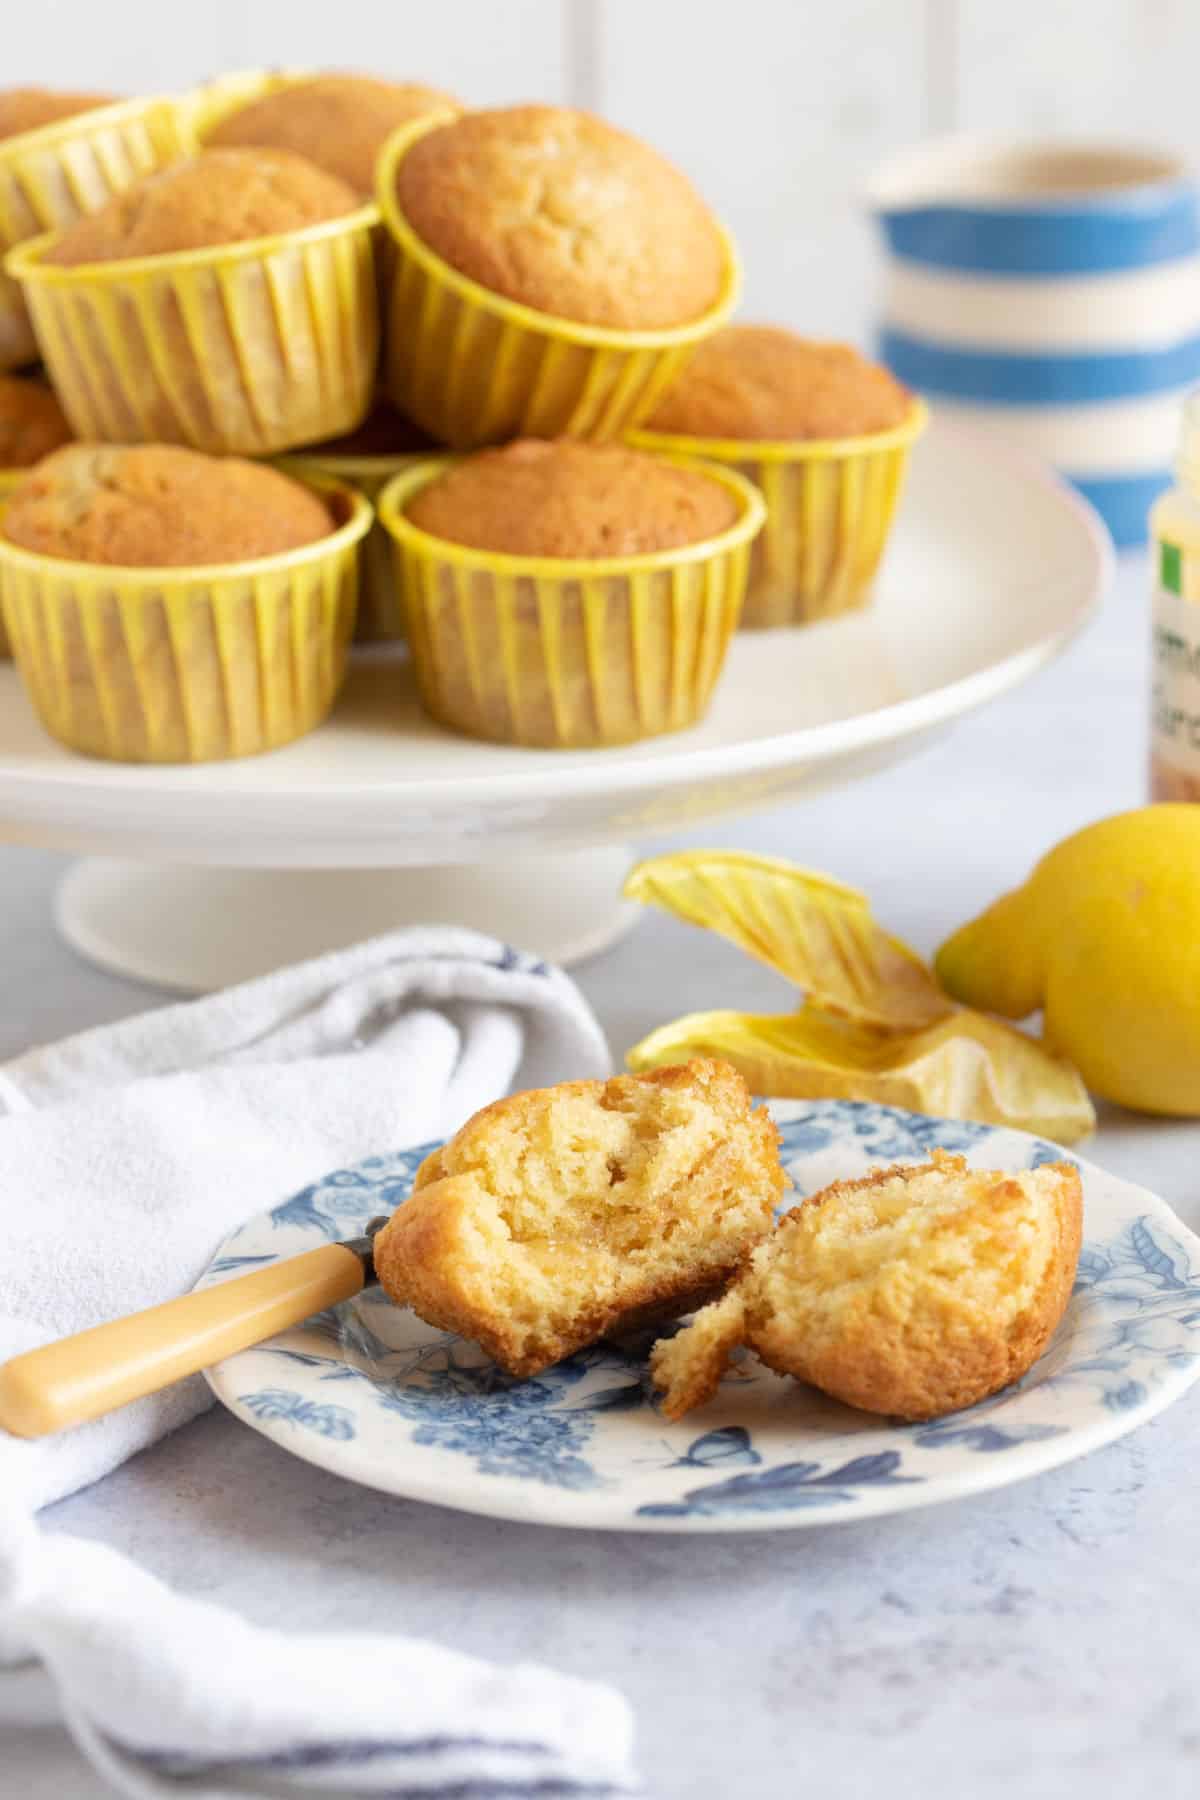 Lemon drizzle muffins on a cake stand.